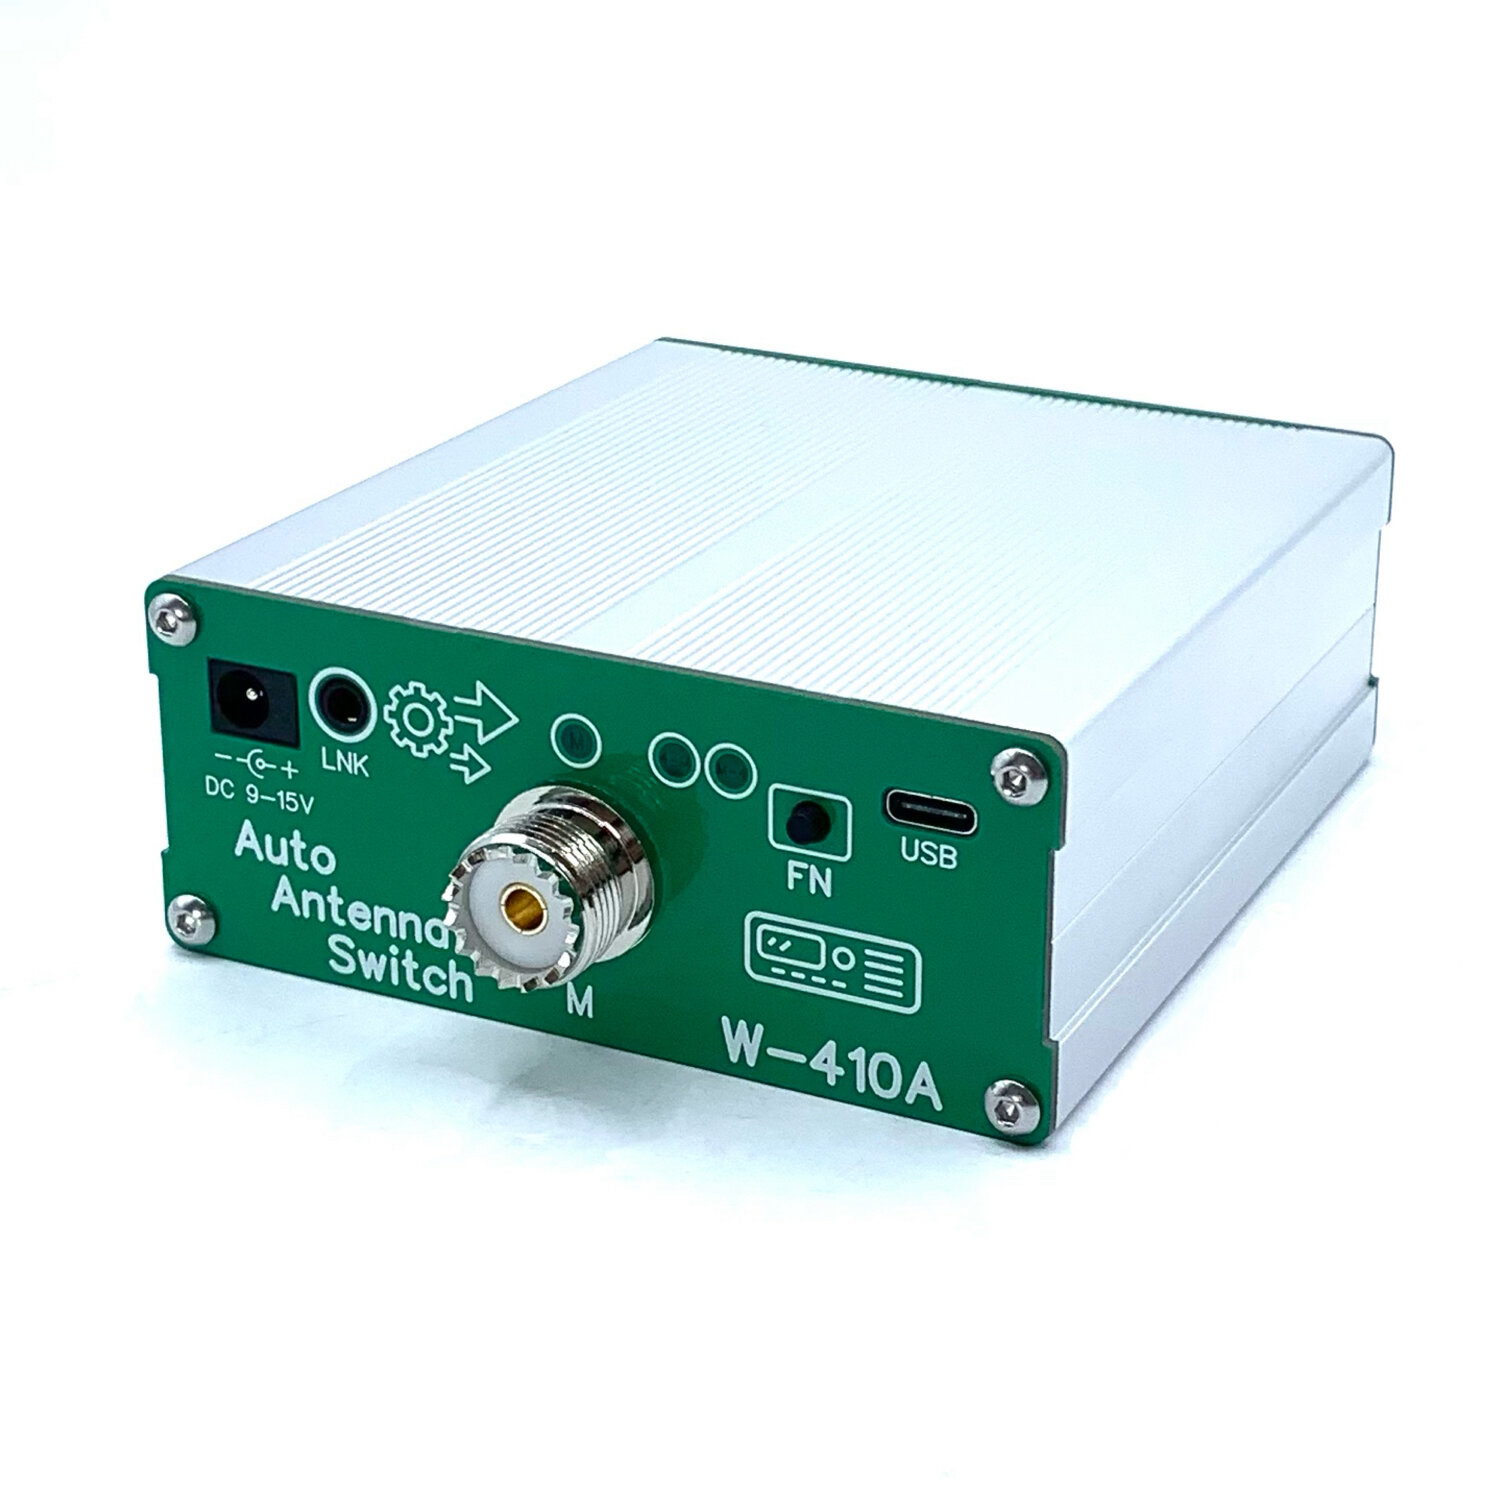 

W410A 200W Automatic Antenna Switch Antenna Switcher Suitable for Shortwave Radio Receivers